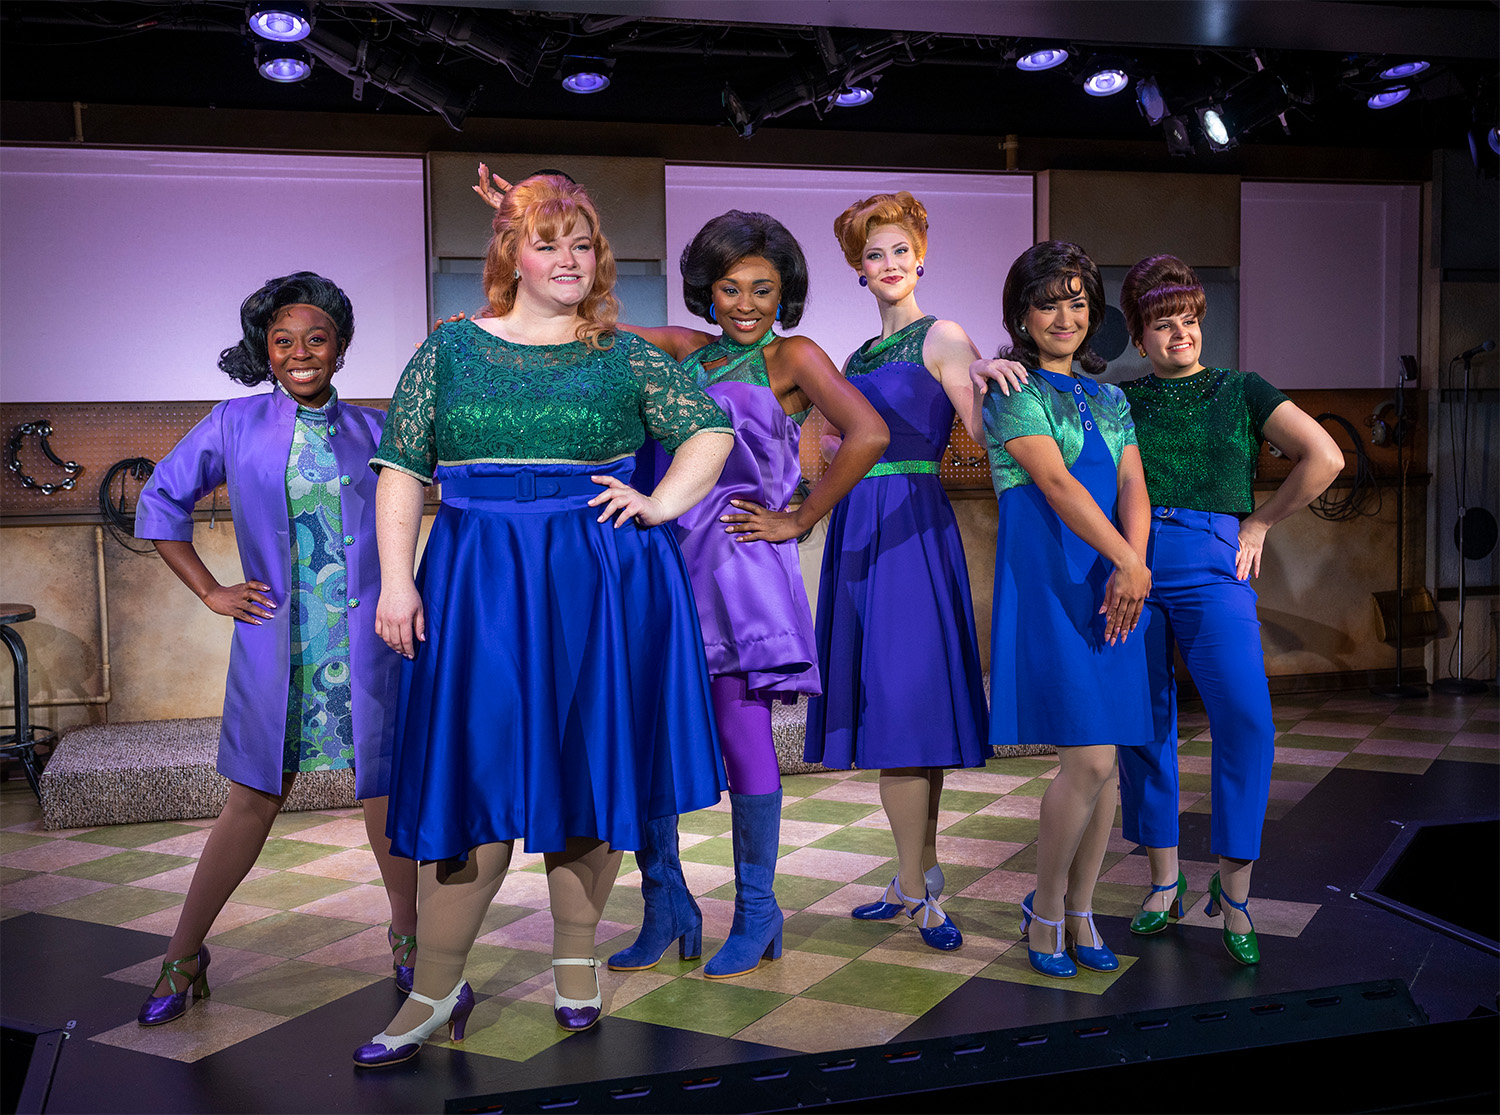 Milwaukee Repertory Theater presents Beehive: The 60s Musical in the Stackner Cabaret November 11, 2022 – January 15, 2023. Pictured: The cast of Beehive: The 60s Musical. Photo by Michael Brosilow.